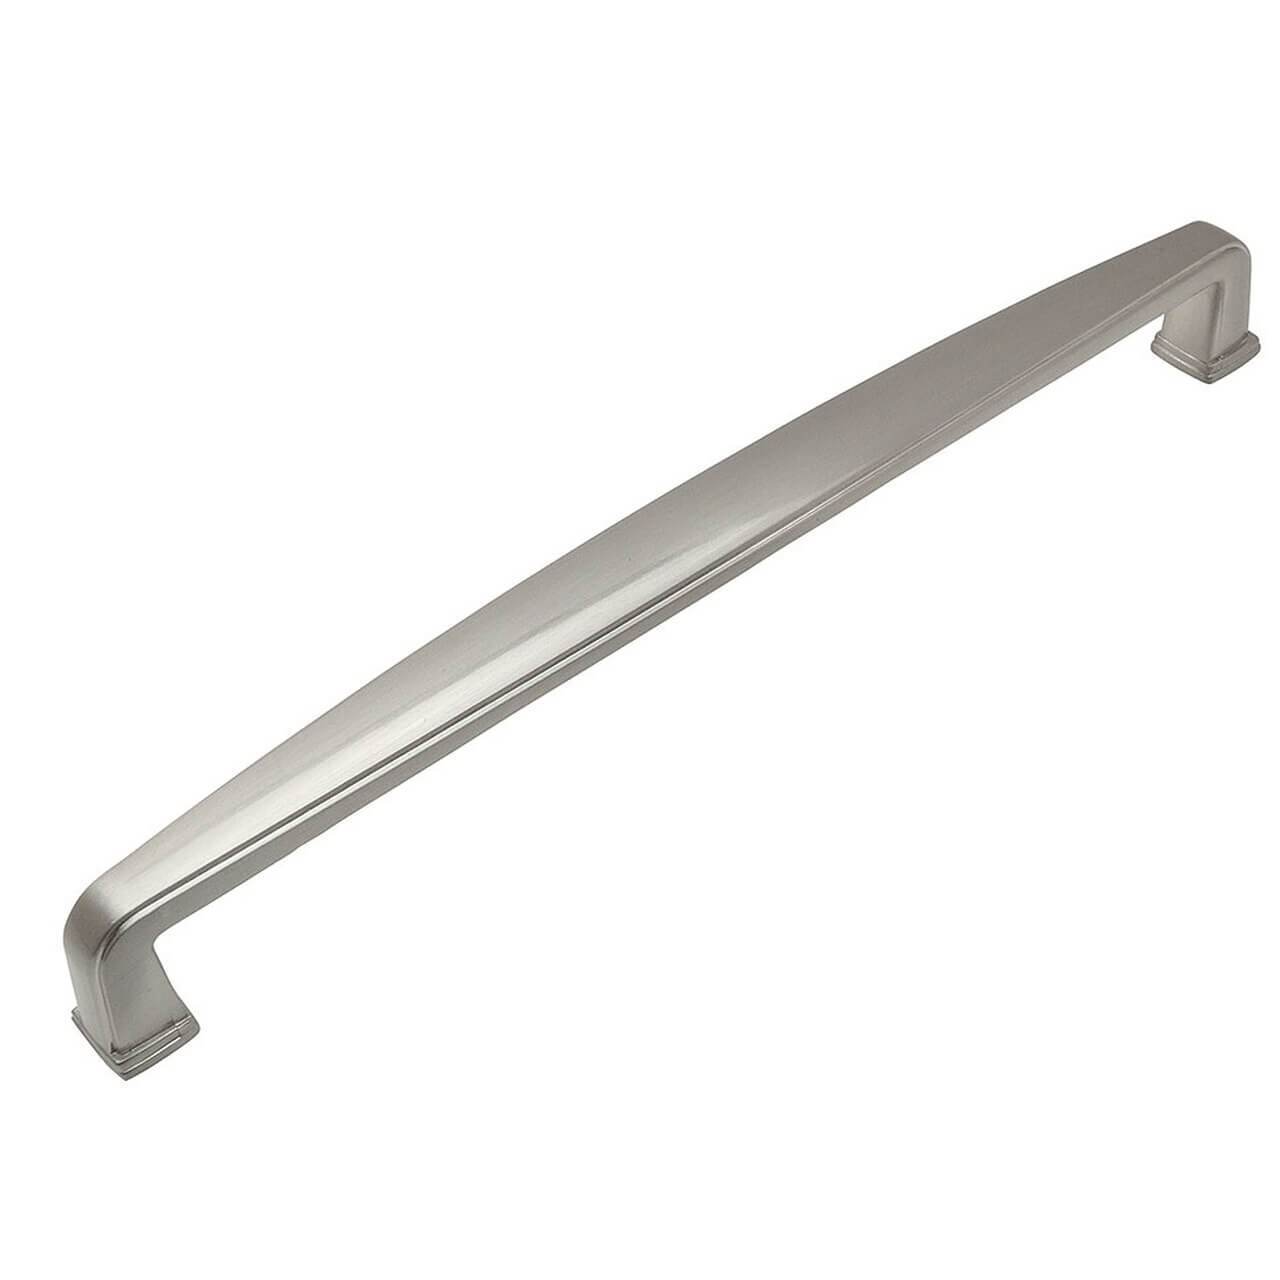 Satin nickel cabinet pull in seven and a half inch hole spacing with a subtle wide design